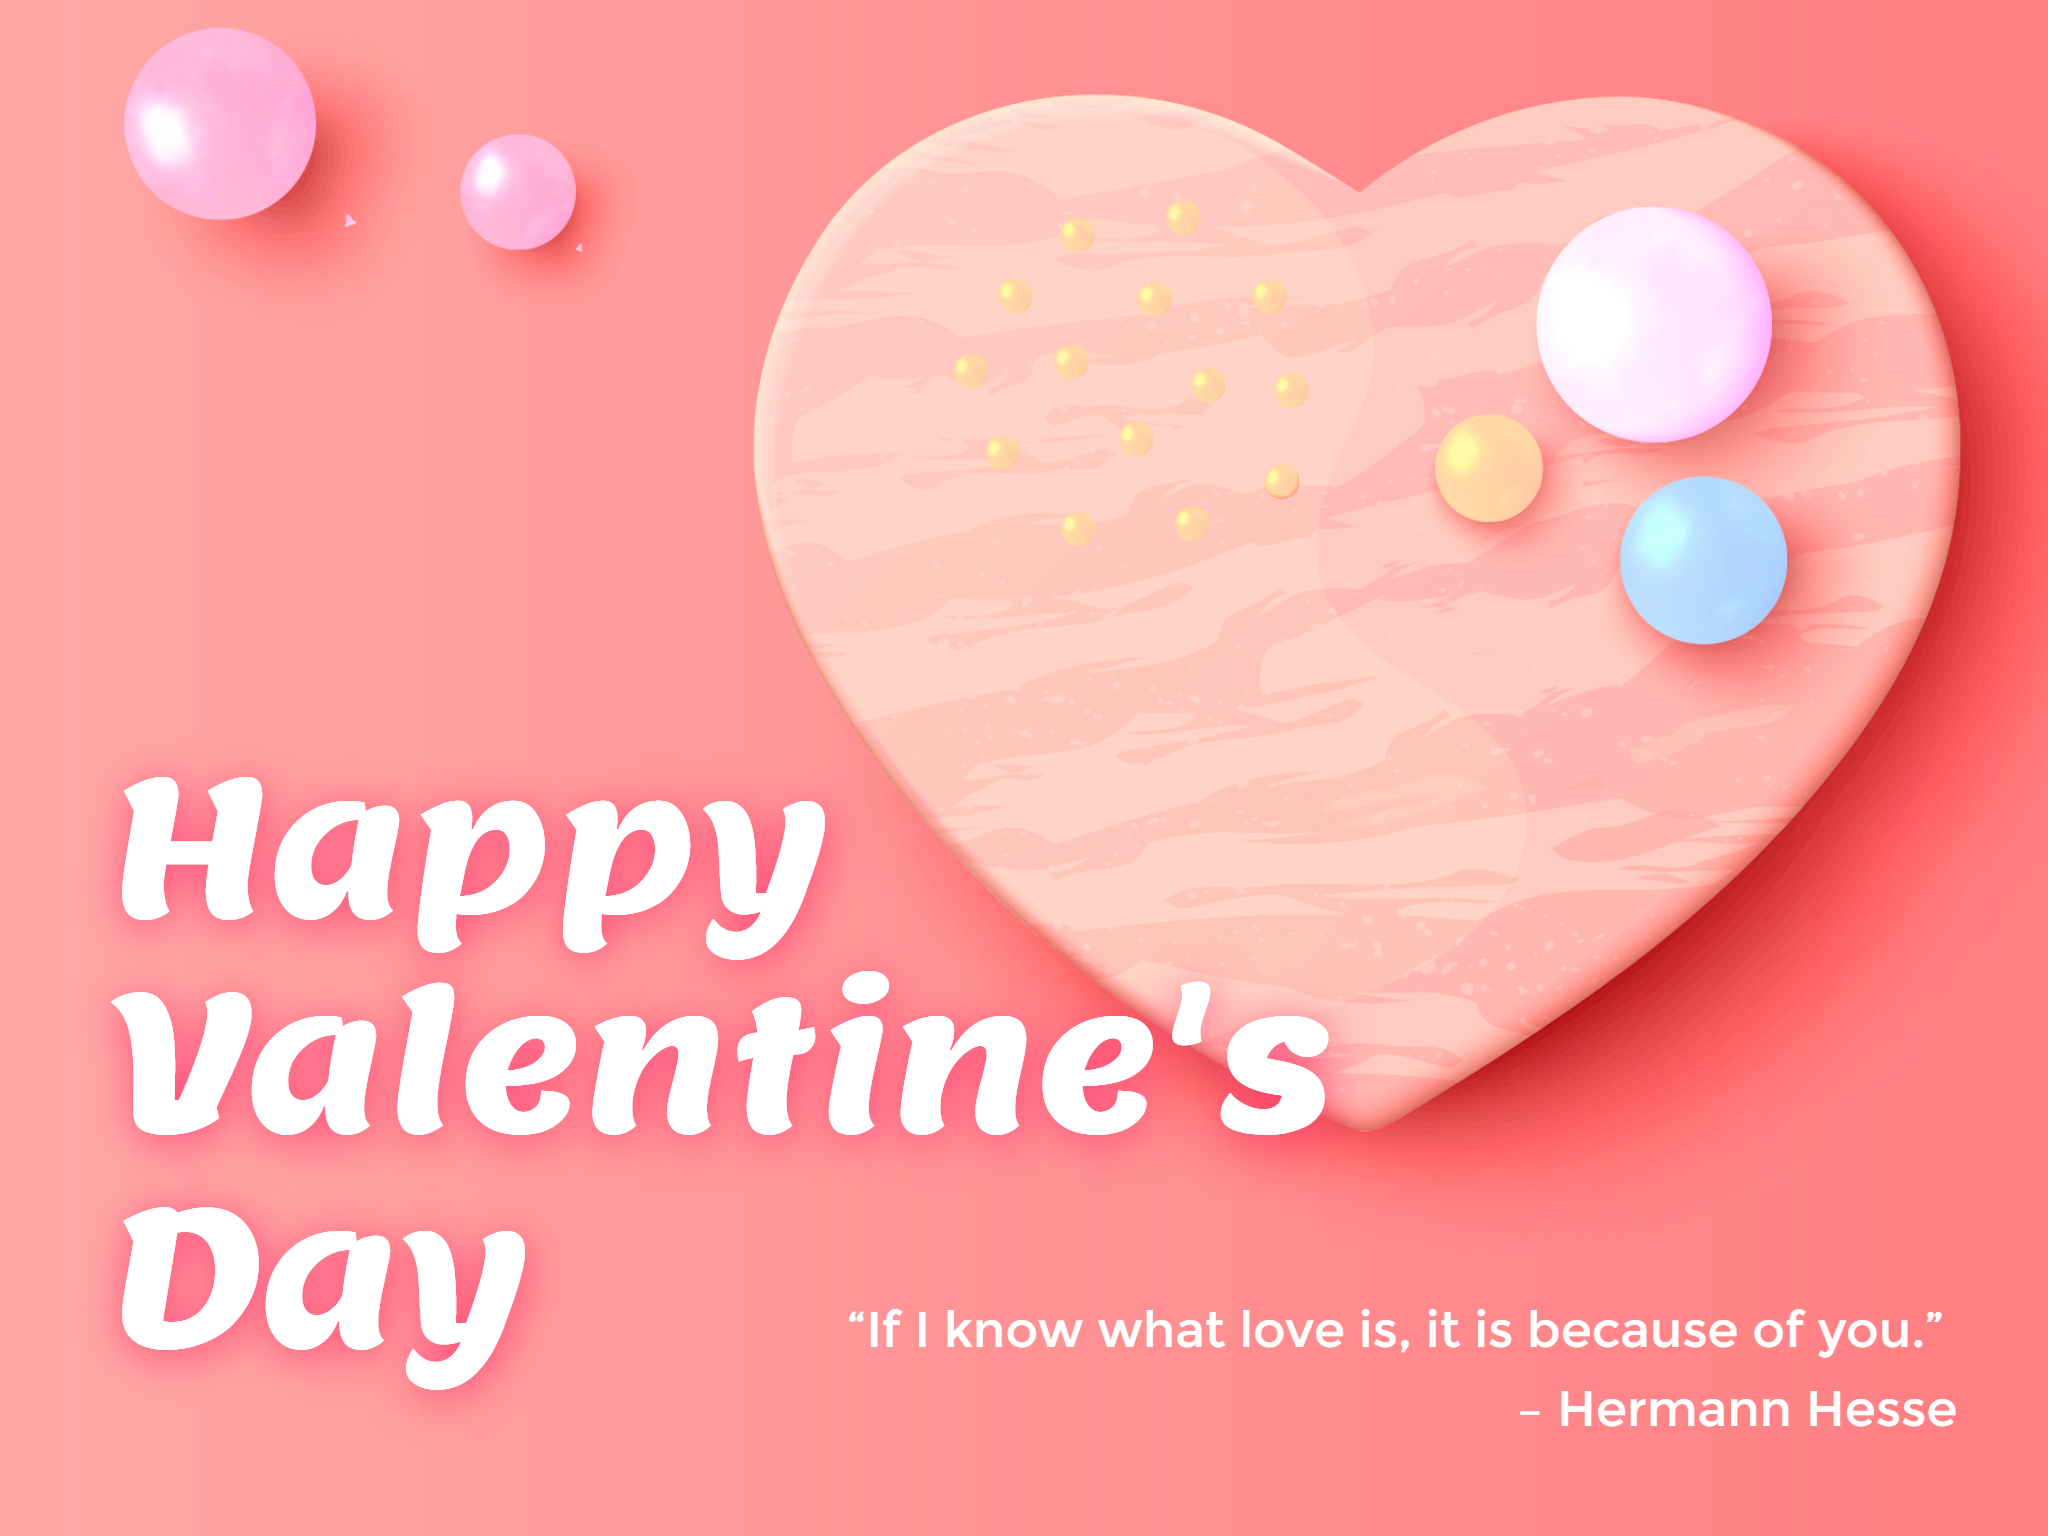 the romantic quote from hermann hesse on the valentine's day card